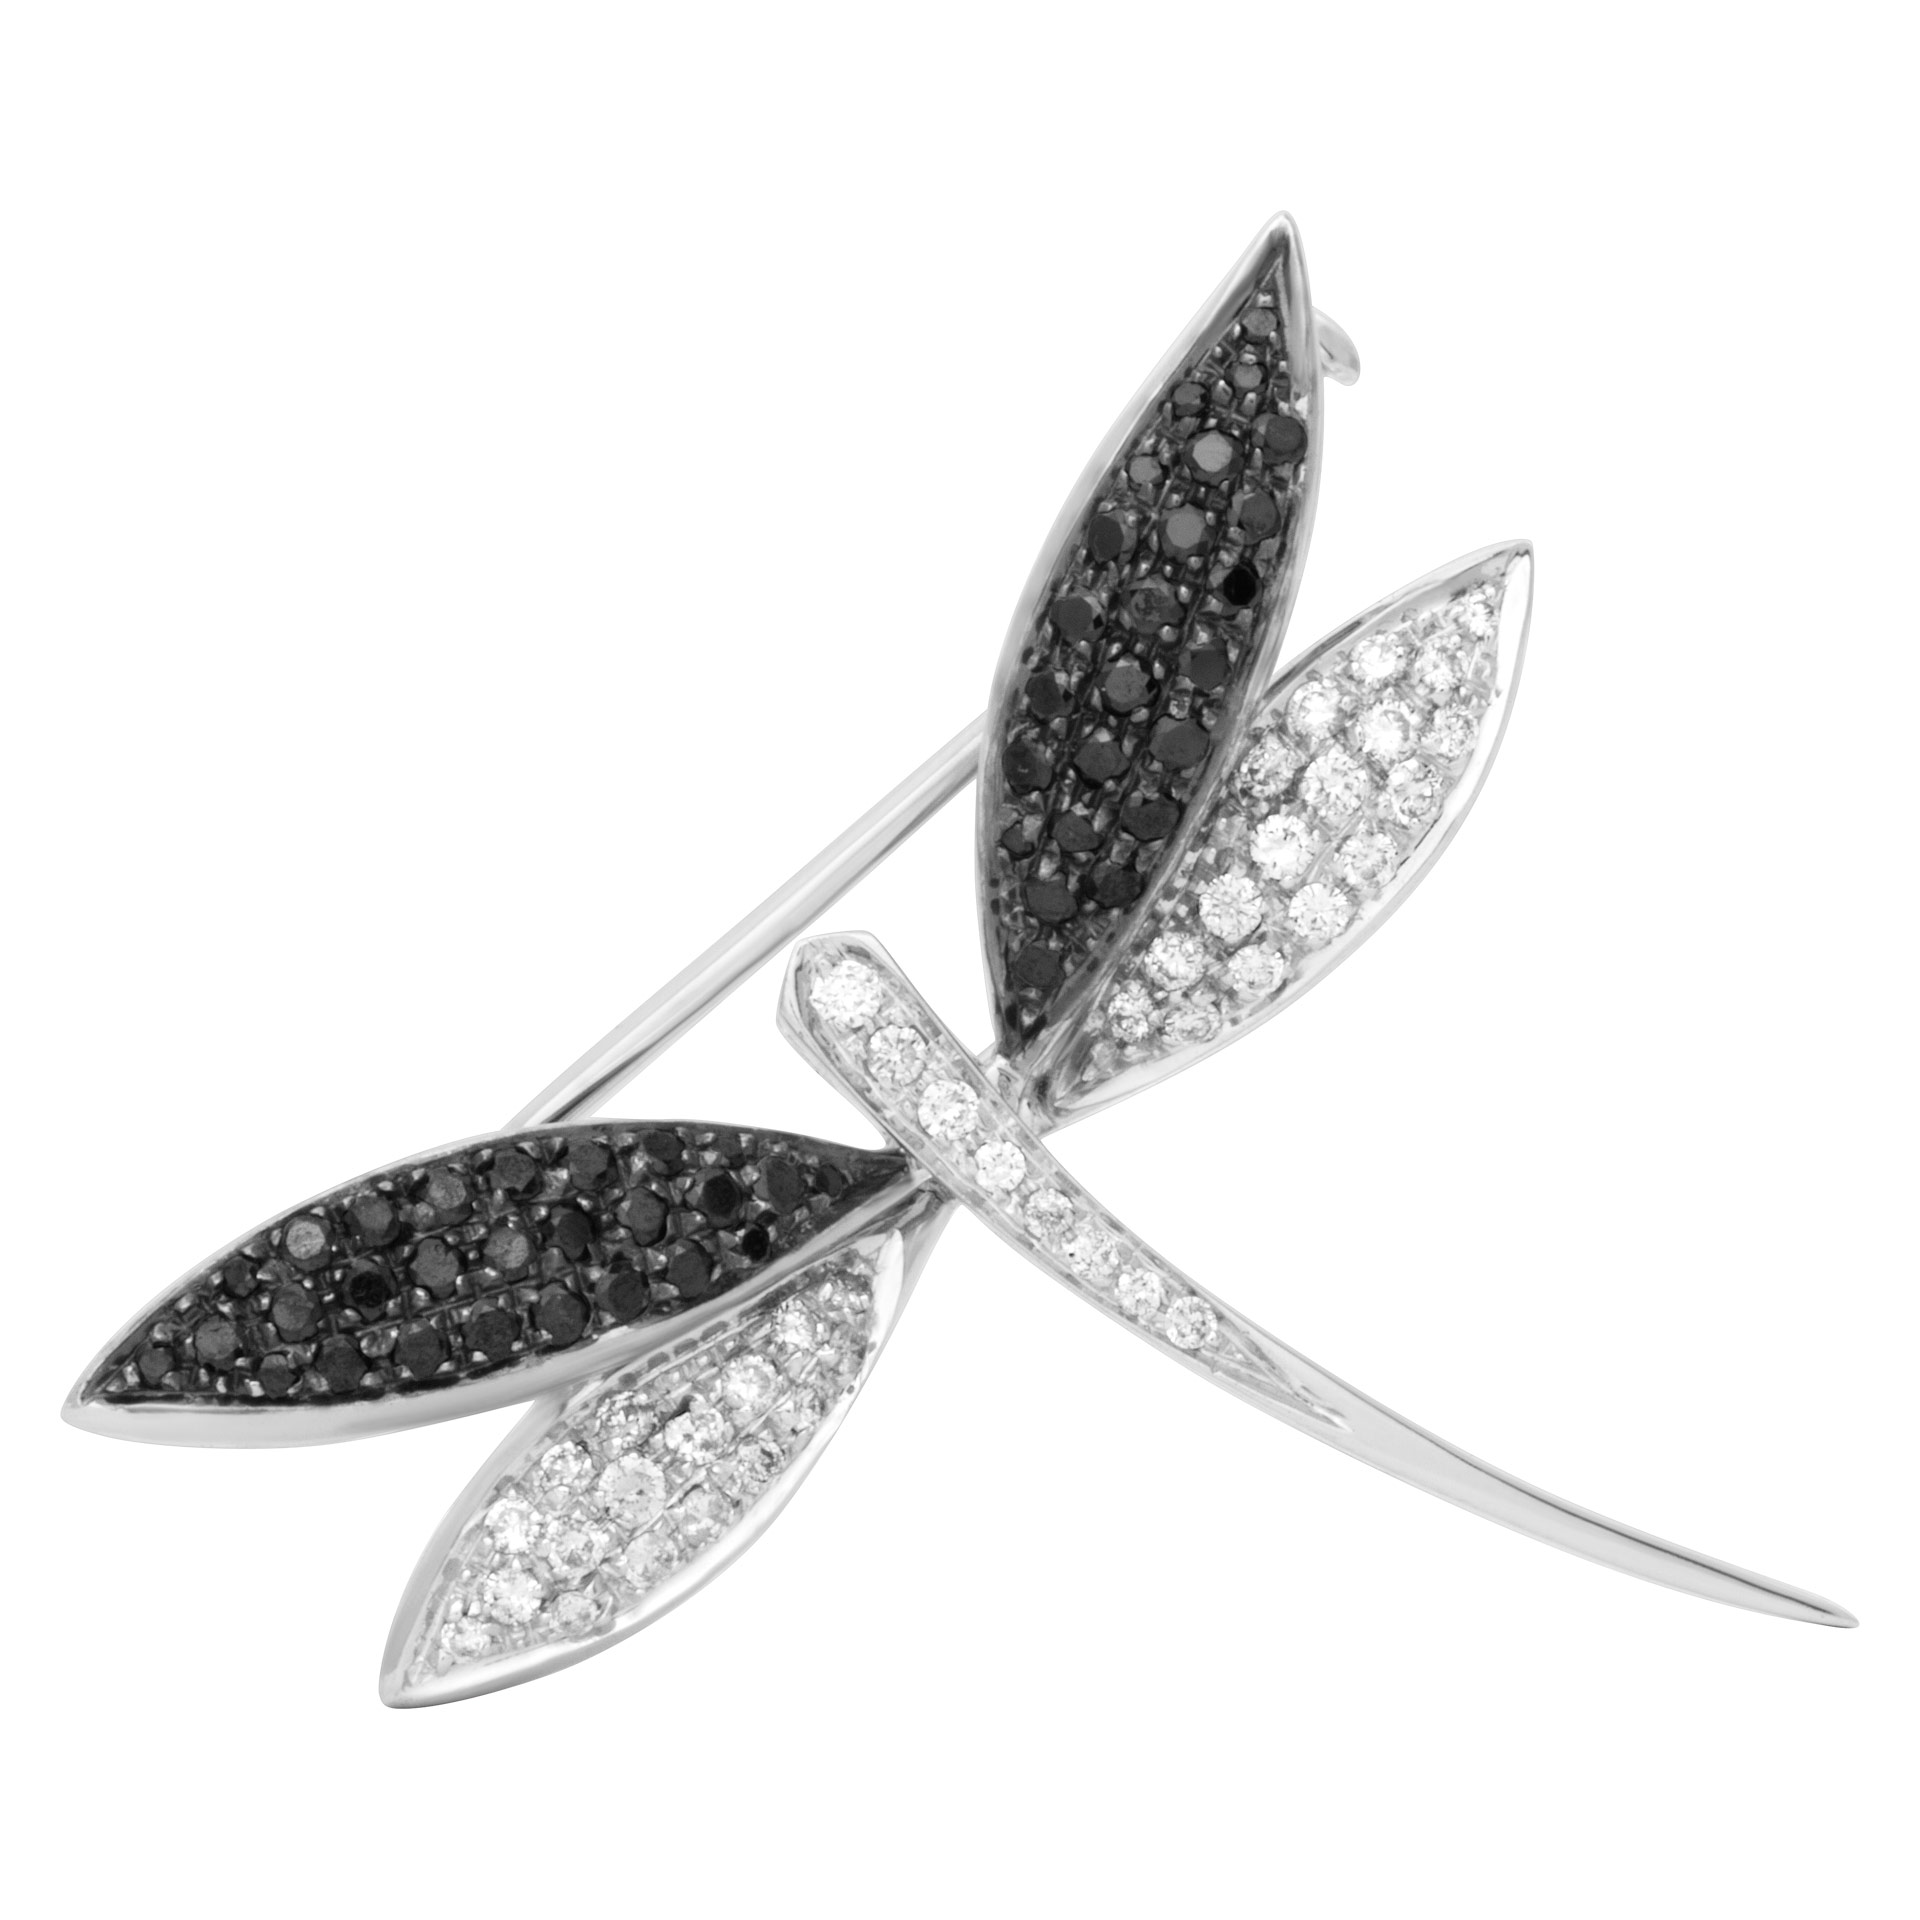 Dragonfly pin in 18k white gold with apptox. 0.60 ct in white diamonds and 0.80 ct in black diamonds image 1